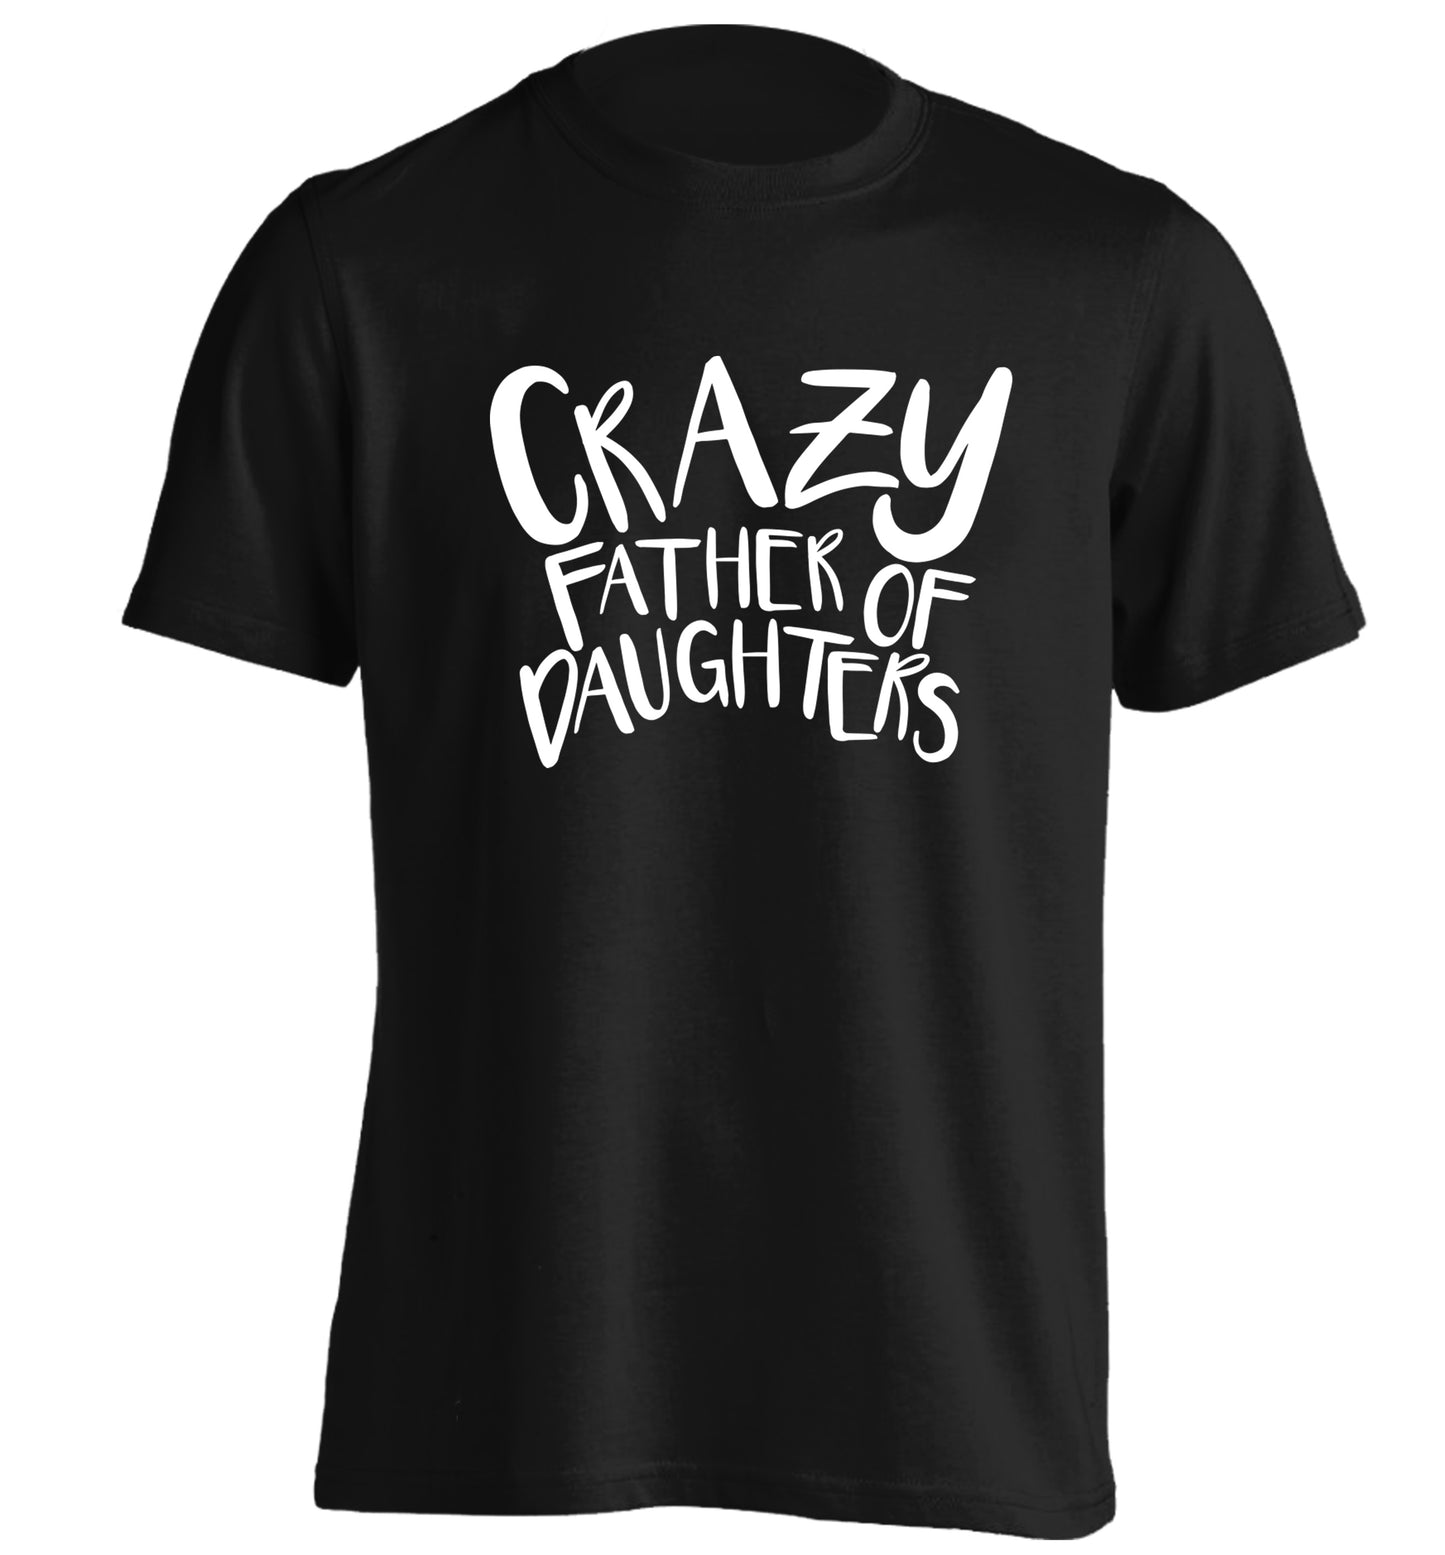 Crazy father of daughters adults unisex black Tshirt 2XL